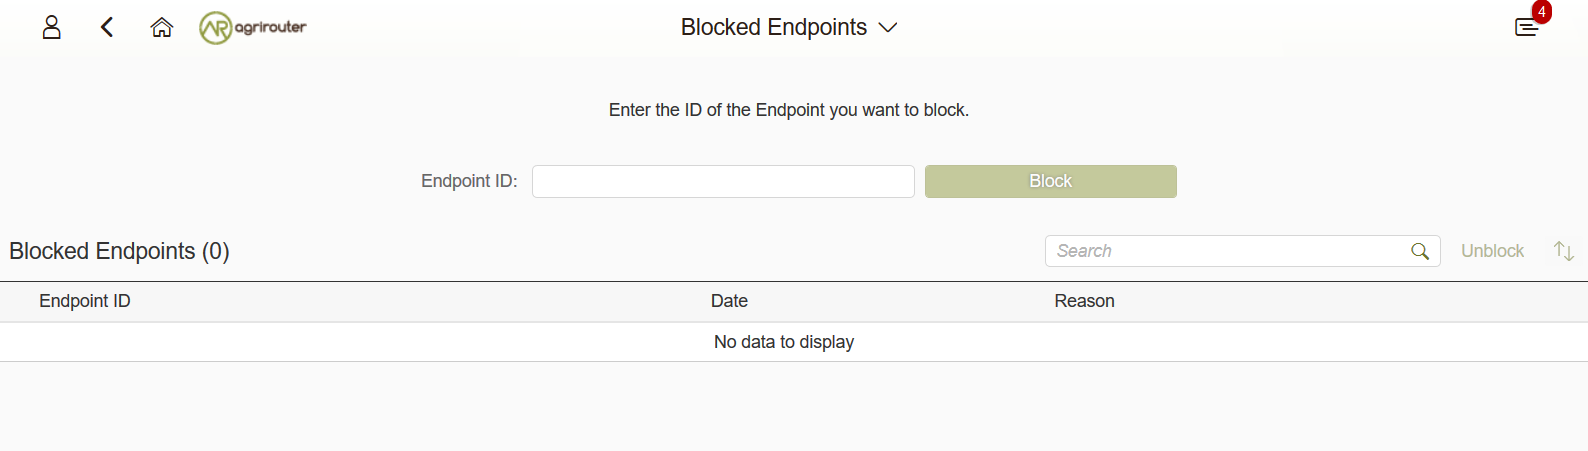 UI to manage blocked endpoints in developer account